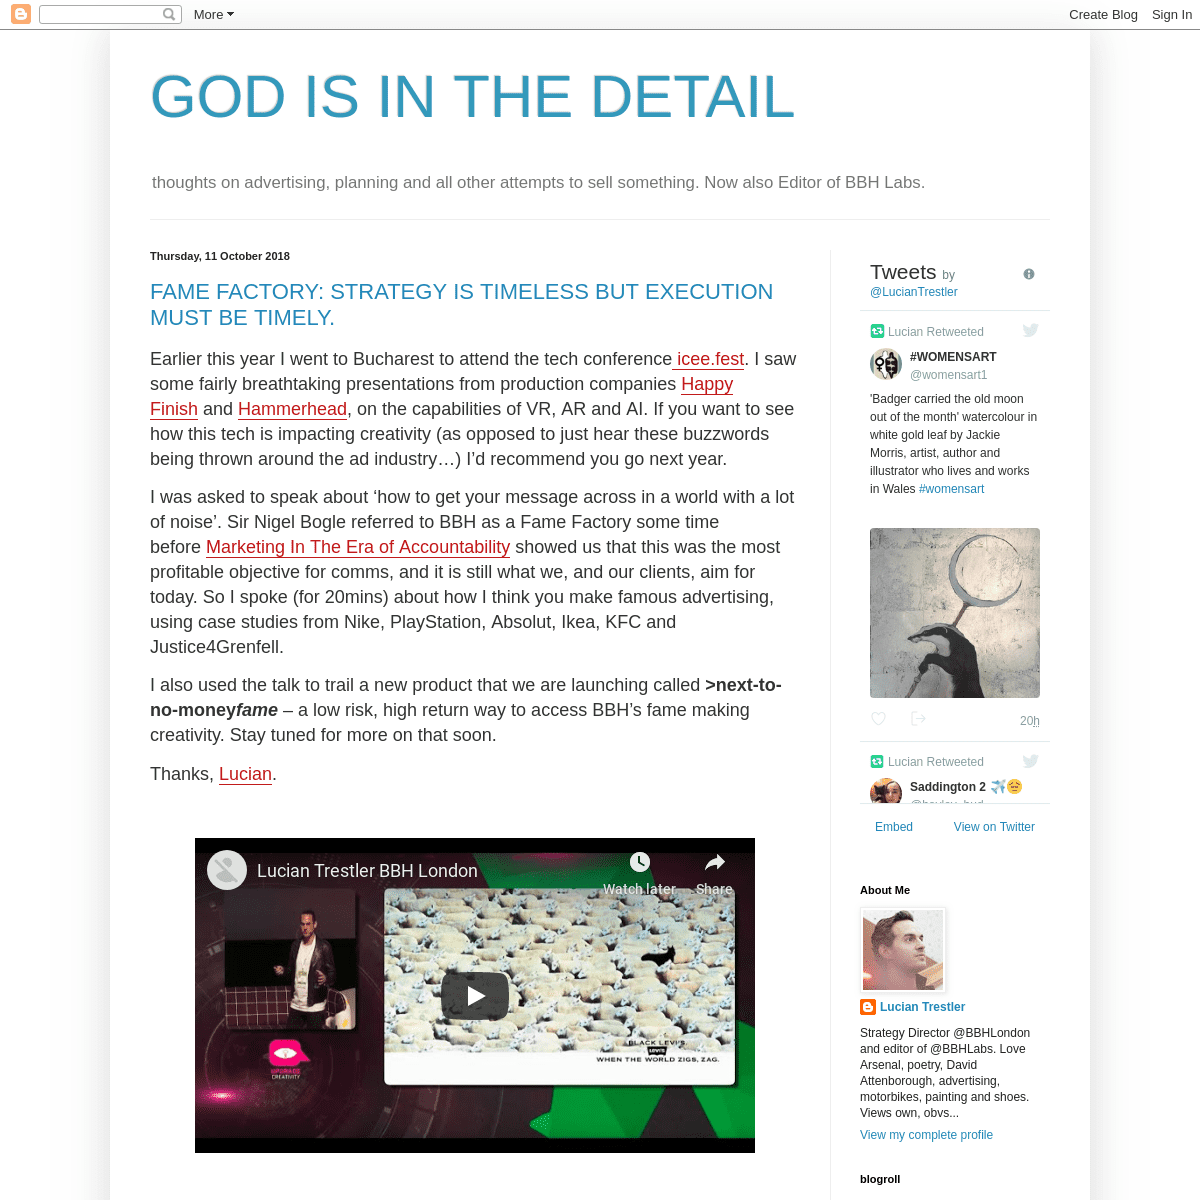 GOD IS IN THE DETAIL